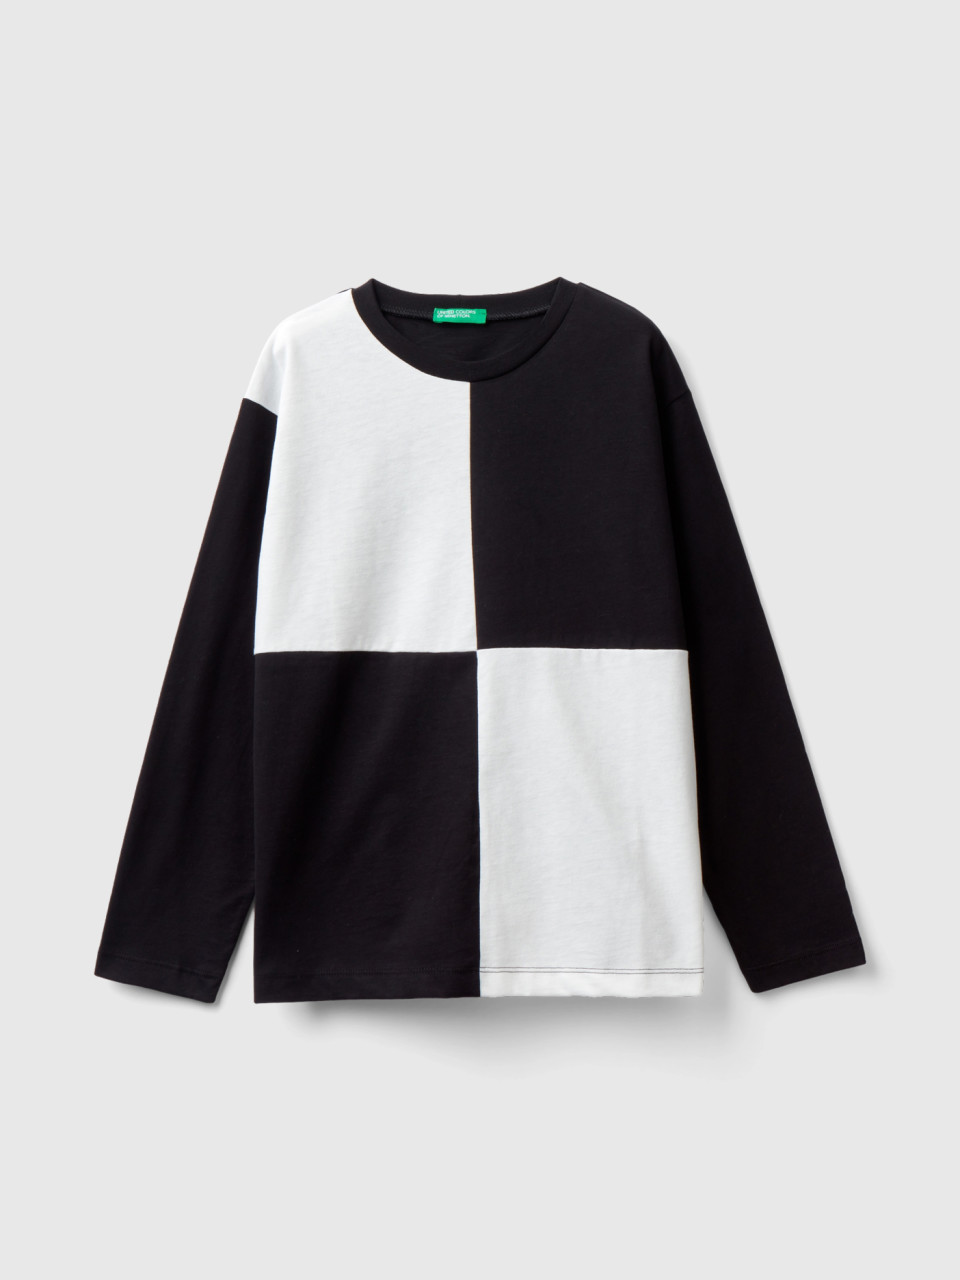 Benetton, T-shirt With Maxi Check, Black, Kids